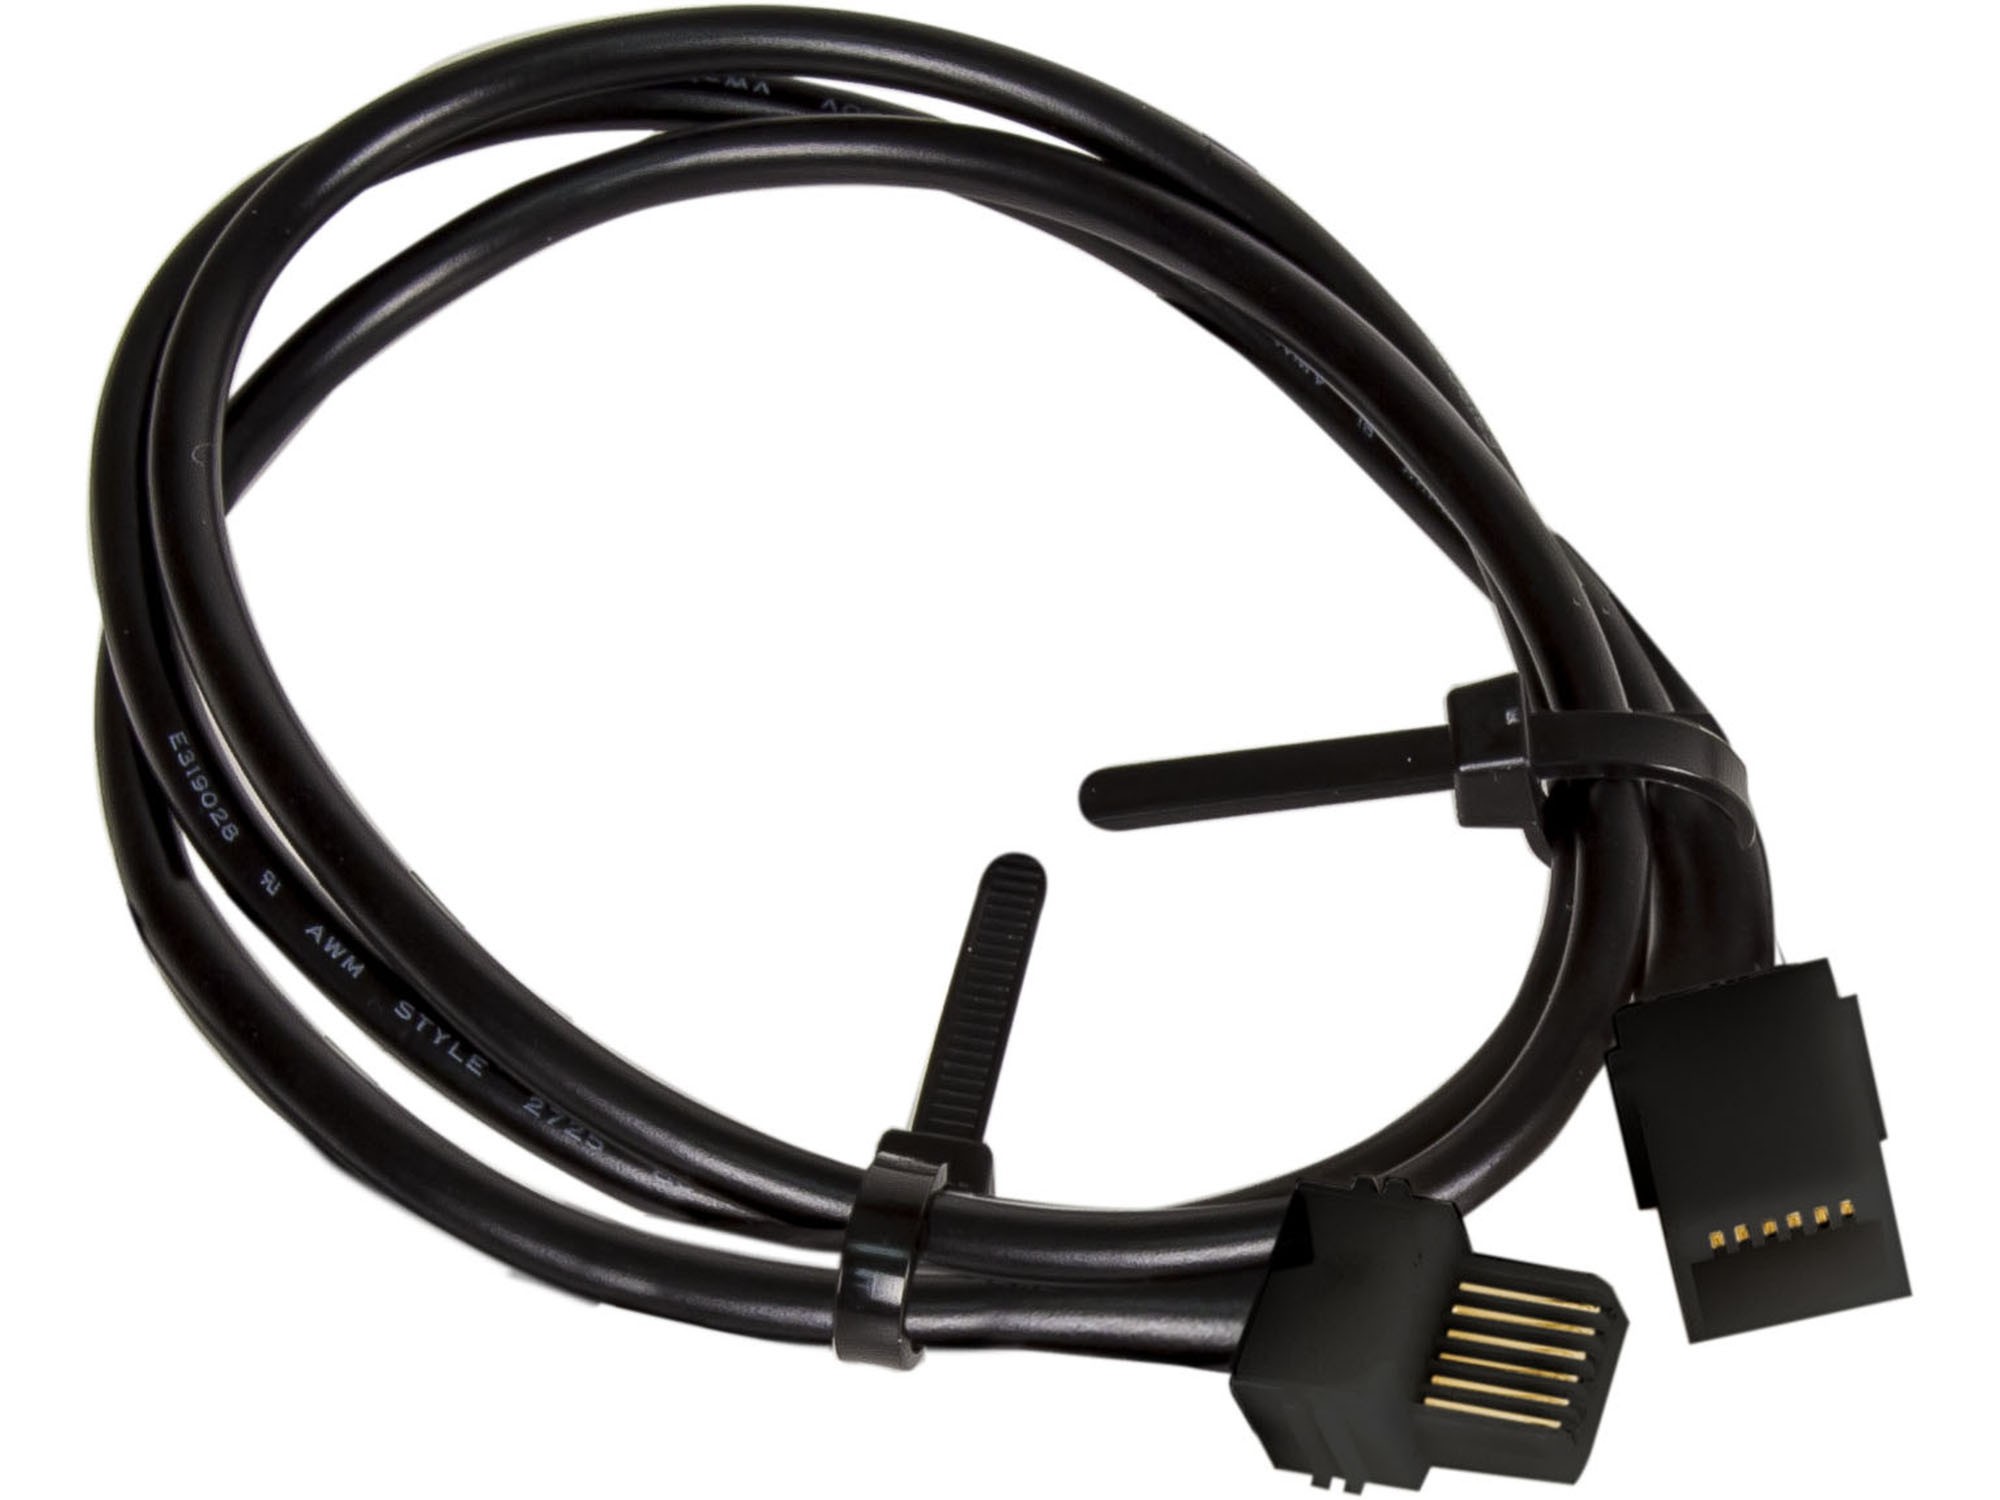 6-82045  Plug-N-Play 6' Control Cable Extension 6 Pin